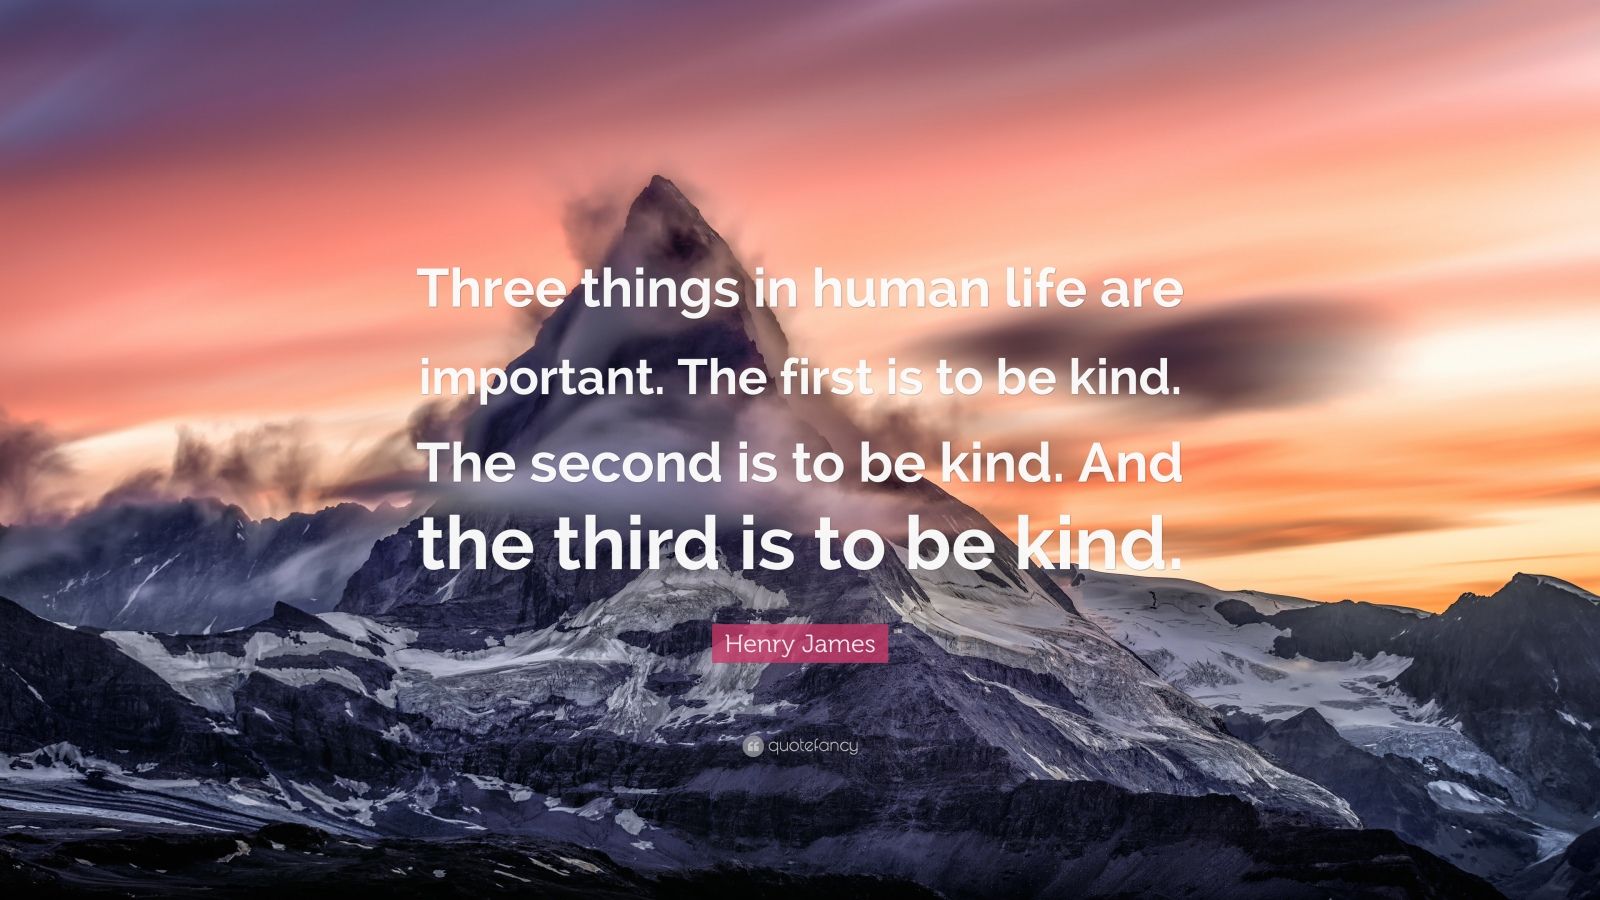 Henry James Quote: “Three things in human life are important. The first